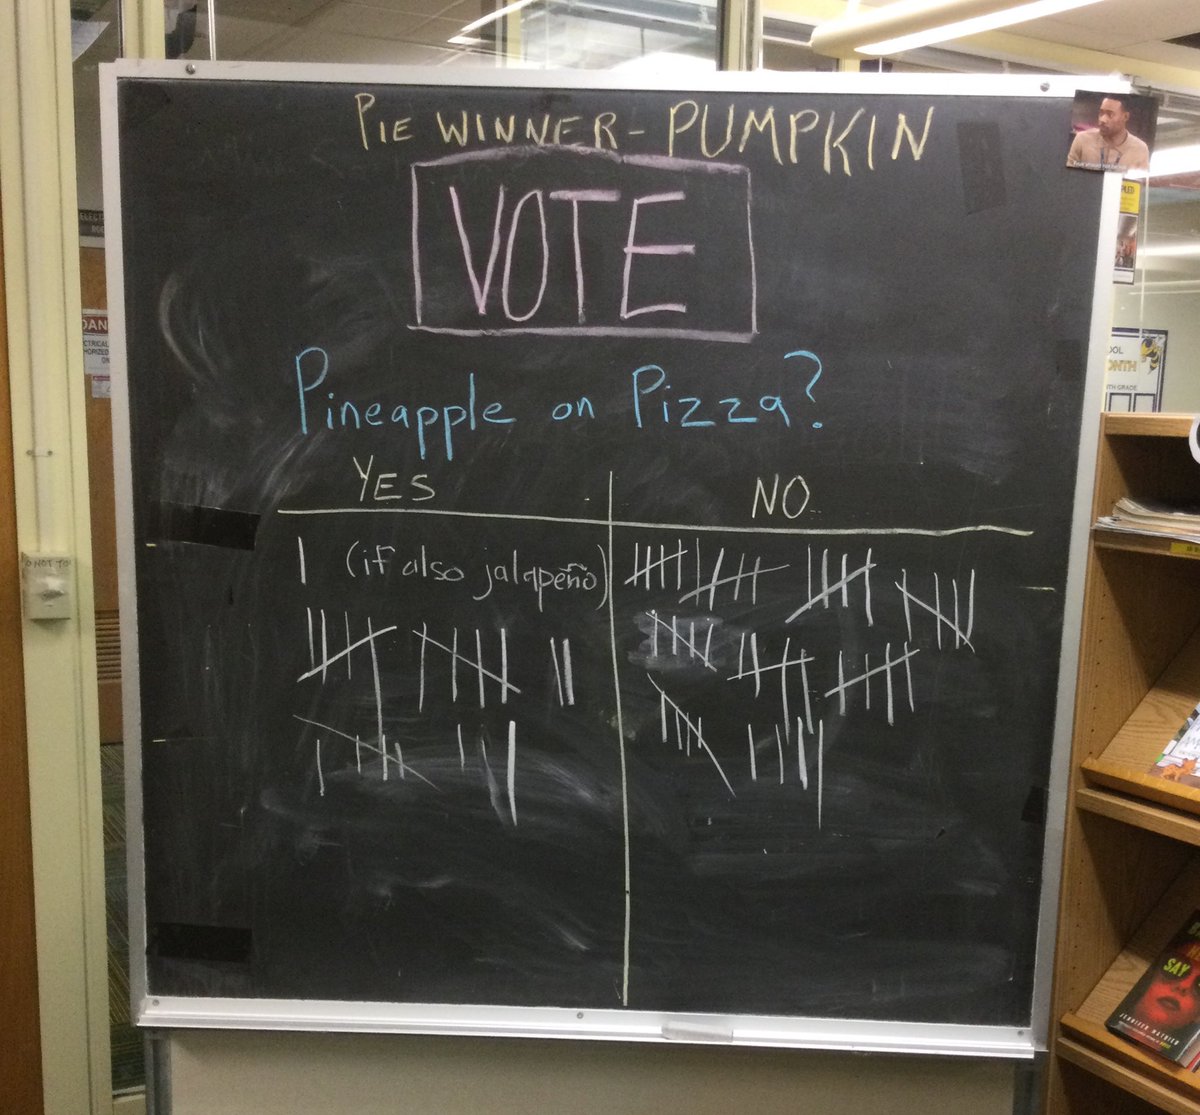 Jefferson students and staff have strong feelings on pineapple on pizza. Last weeks poll winner was Pumpkin as the favorite pie of our yellowjackets. <a target='_blank' href='http://twitter.com/APSLibrarians'>@APSLibrarians</a> <a target='_blank' href='http://twitter.com/JeffersonIBMYP'>@JeffersonIBMYP</a> <a target='_blank' href='https://t.co/IKkWDI8ZzK'>https://t.co/IKkWDI8ZzK</a>